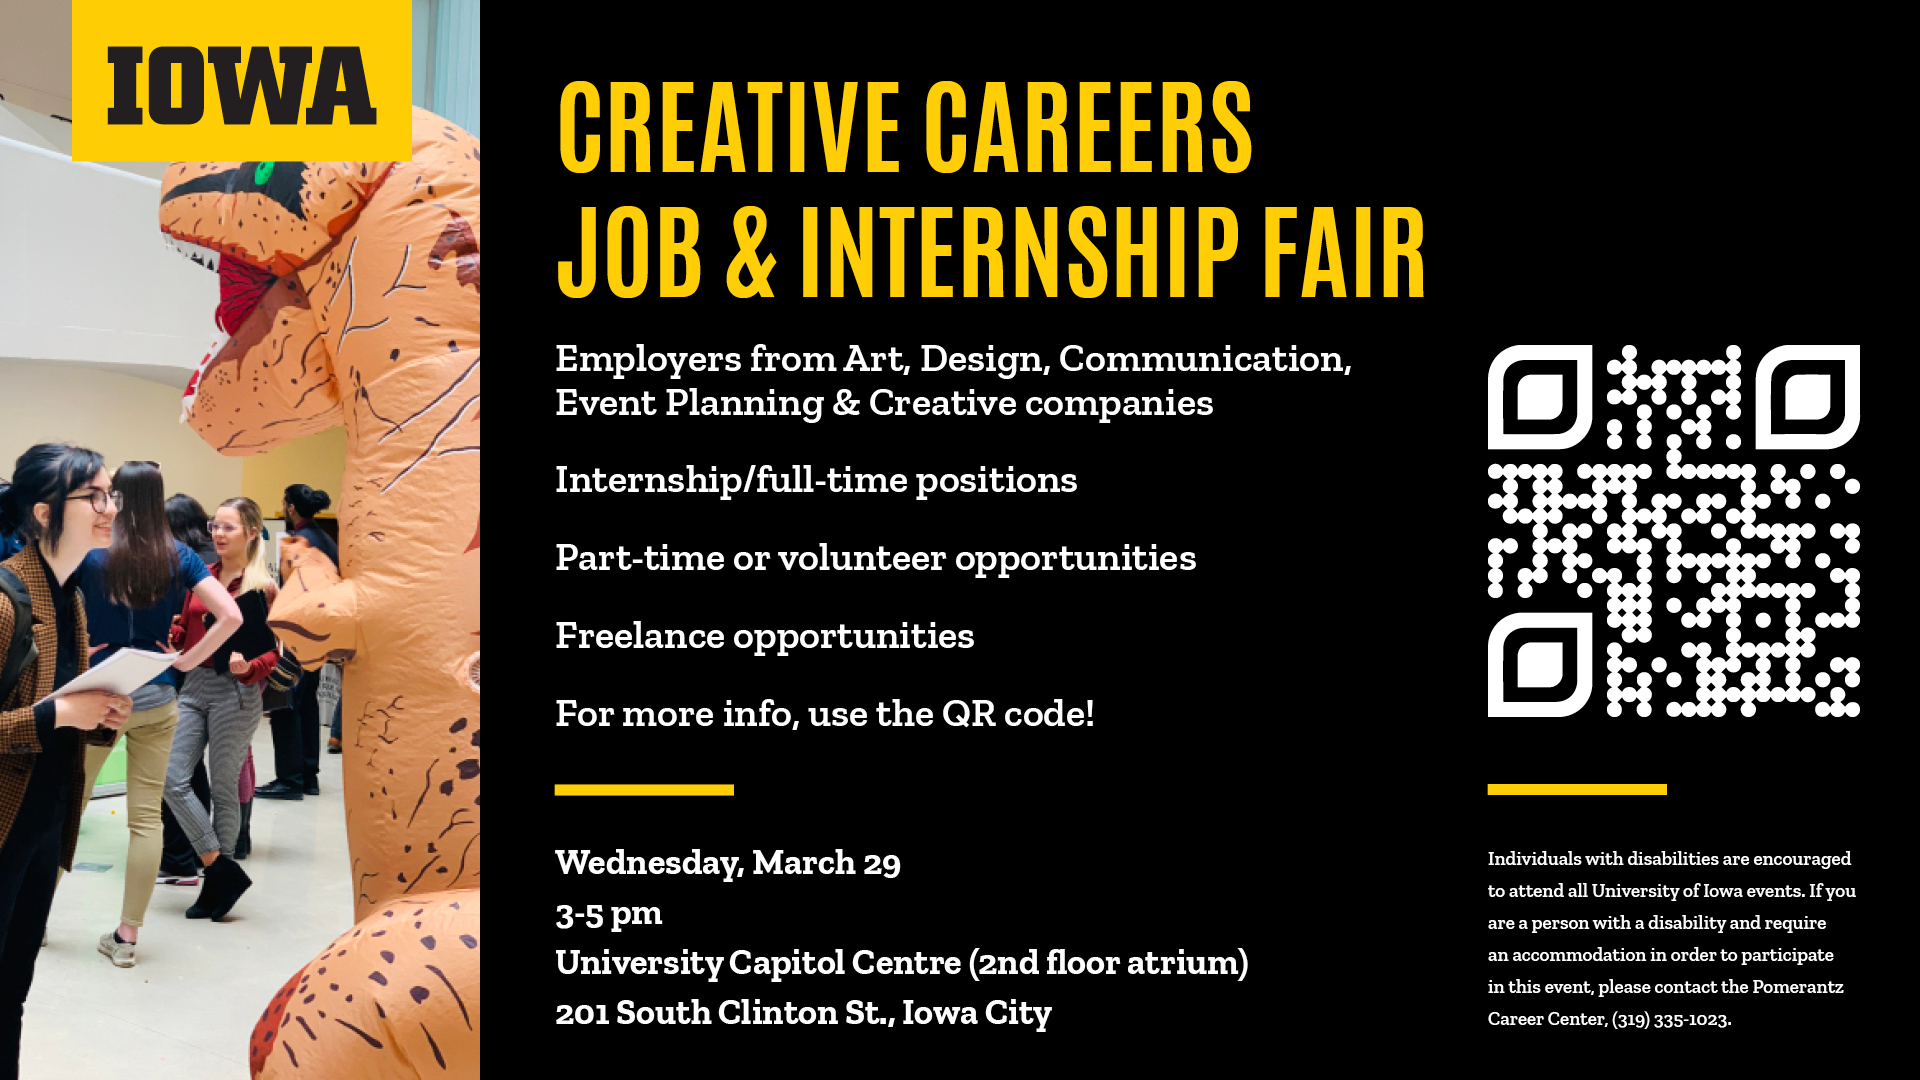 Flier for Creative Careers and Jobs Internship; black background and yellow font